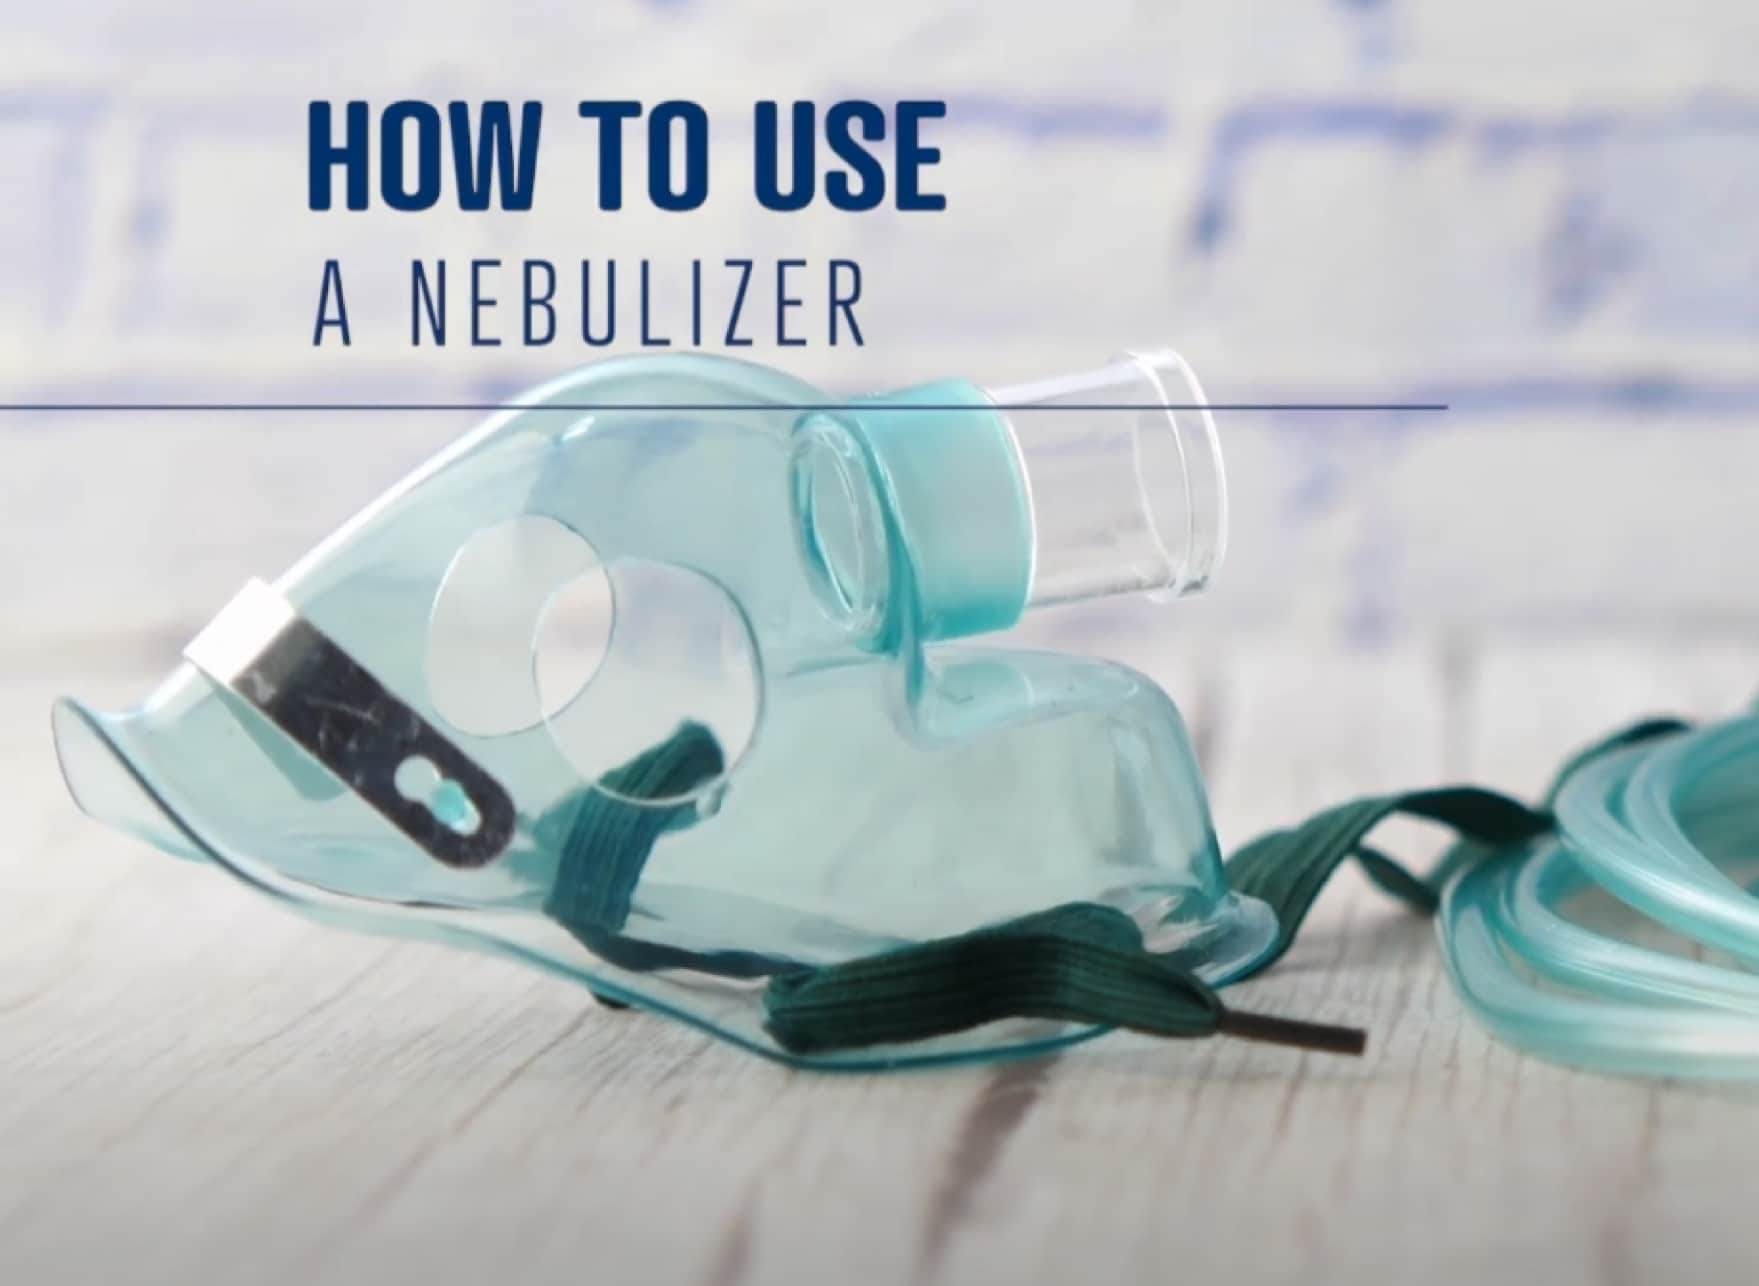 Image of a nebulizer mask and text that reads "how to use a nebulizer".